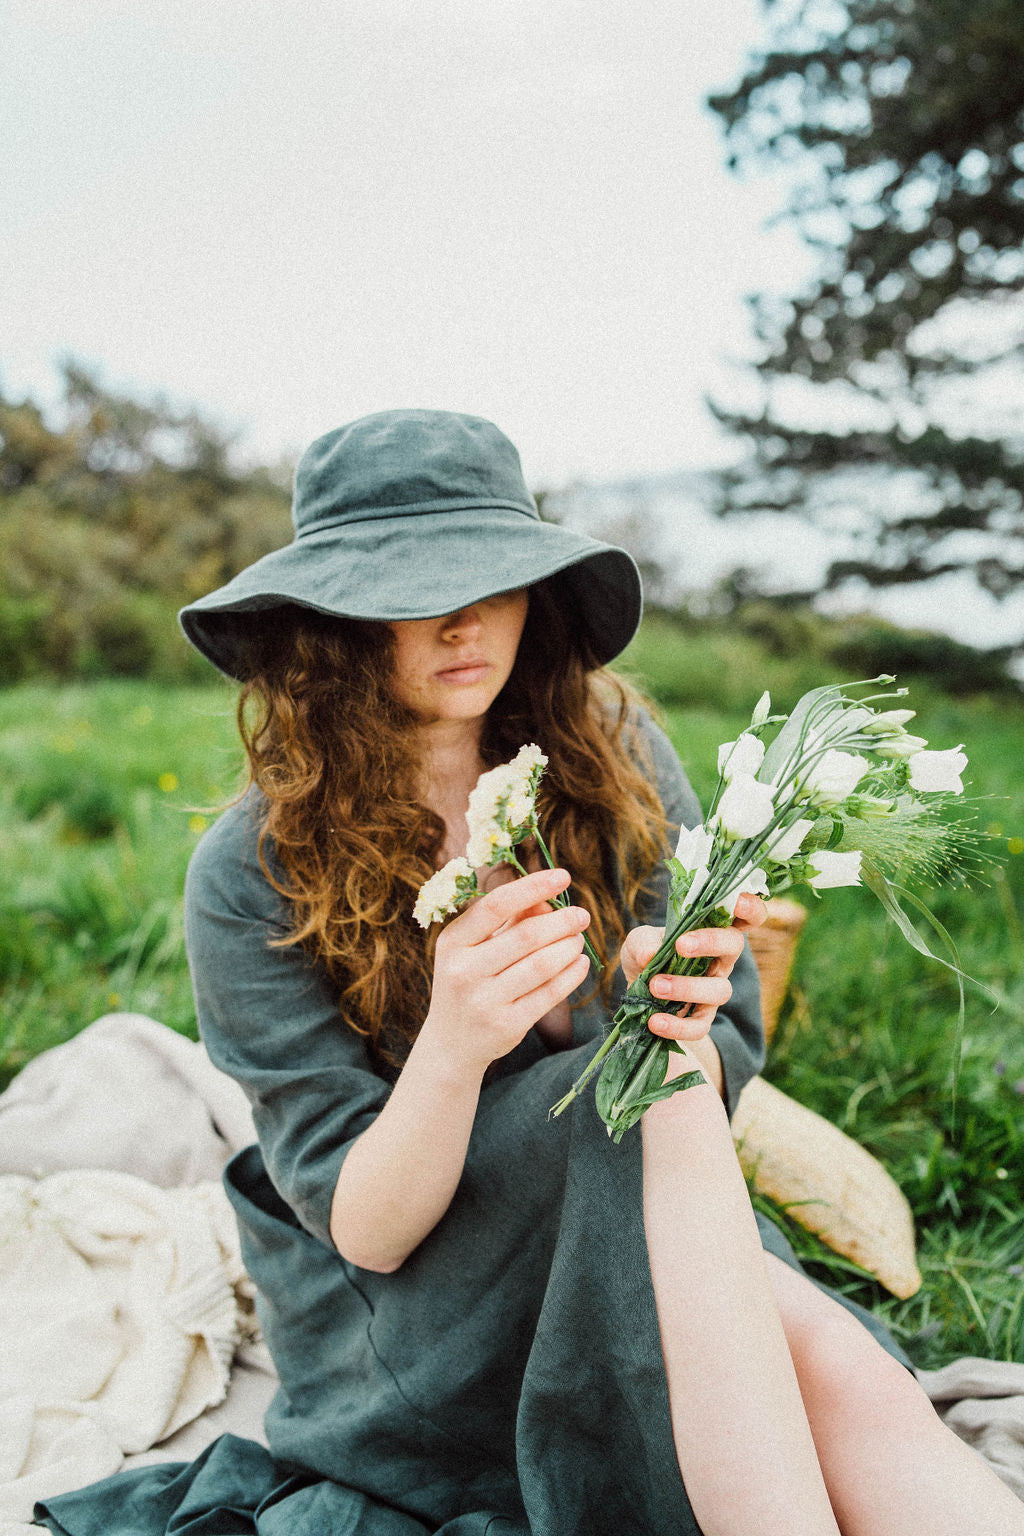 Solpardus in wild meadow for picnic. Nyx linen hat Delphi linen dress. All natural ethical sustainable sunwear swimwear linen clothing perfect for sensitive skin psoriasis and eczema